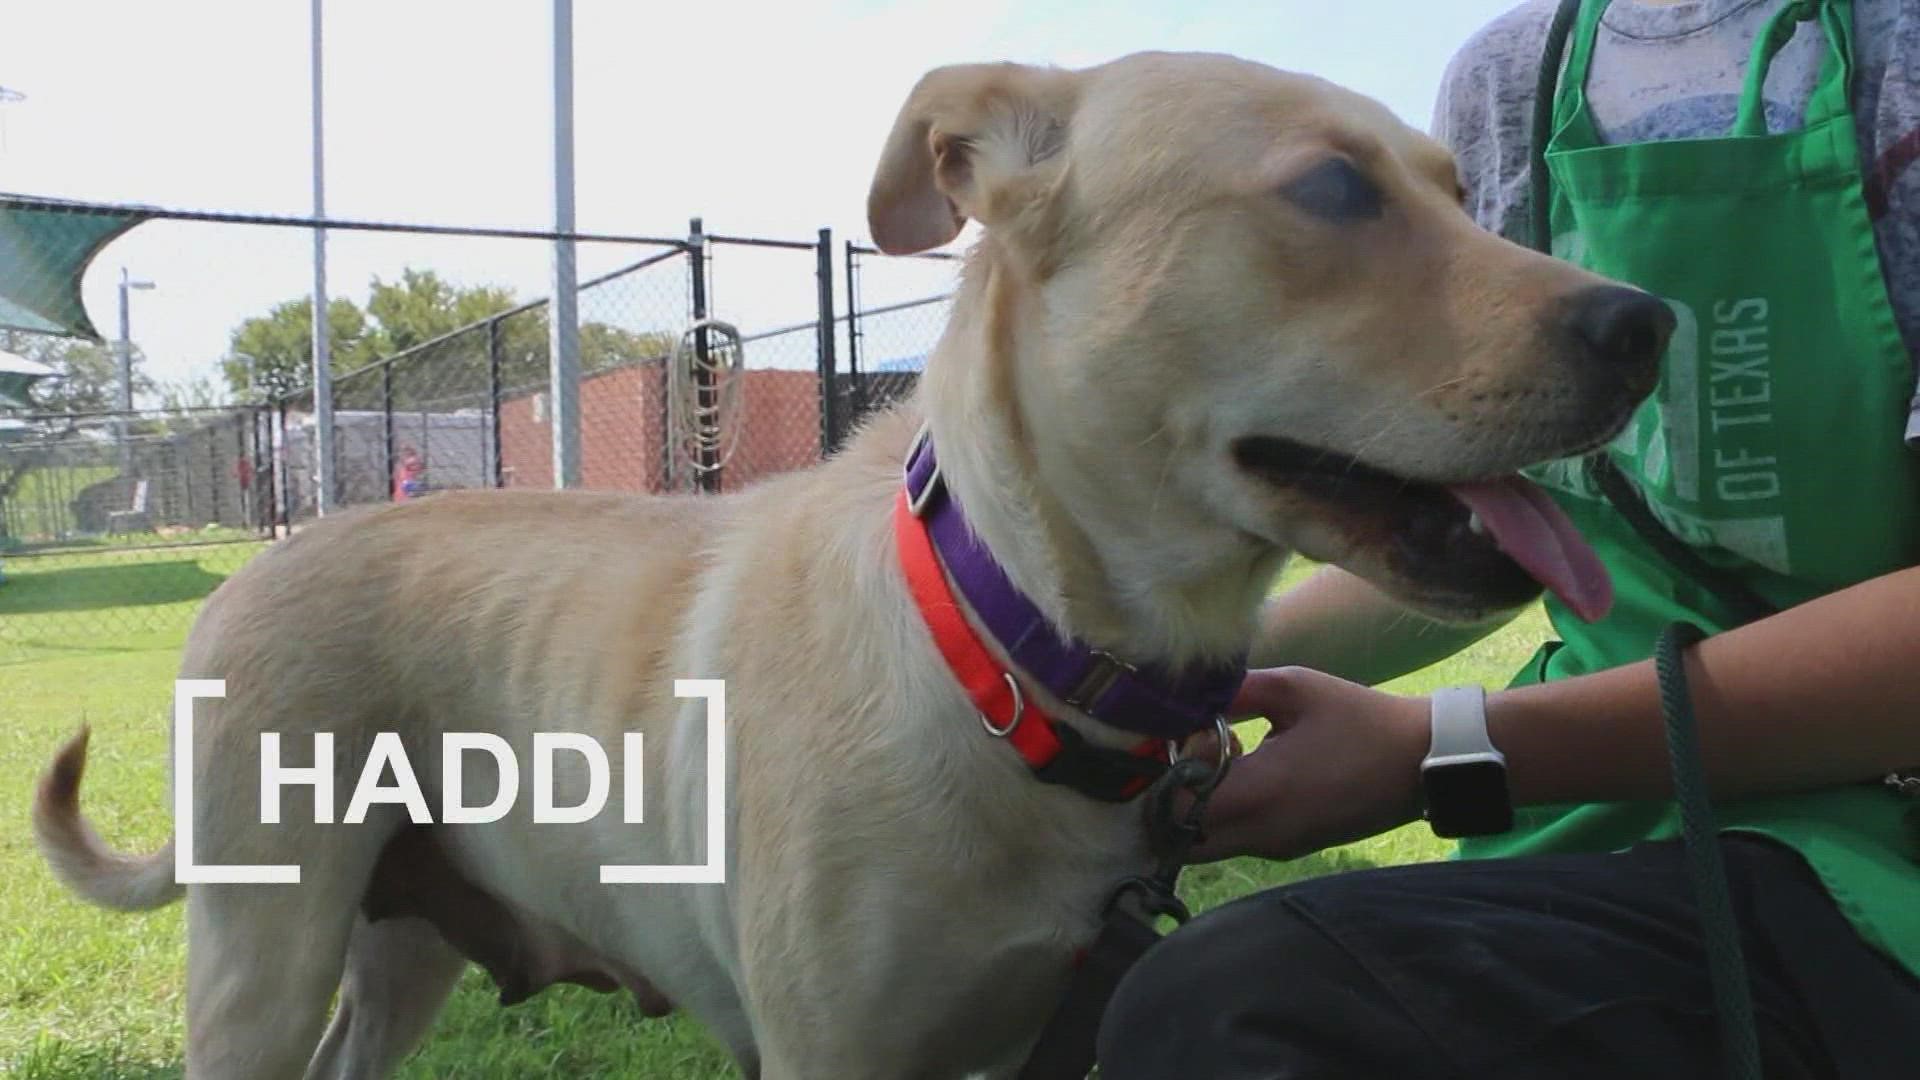 If you're in need of a furry friend, SPCA says 2-year-old Lab mix, Haddi, is up for adoption.